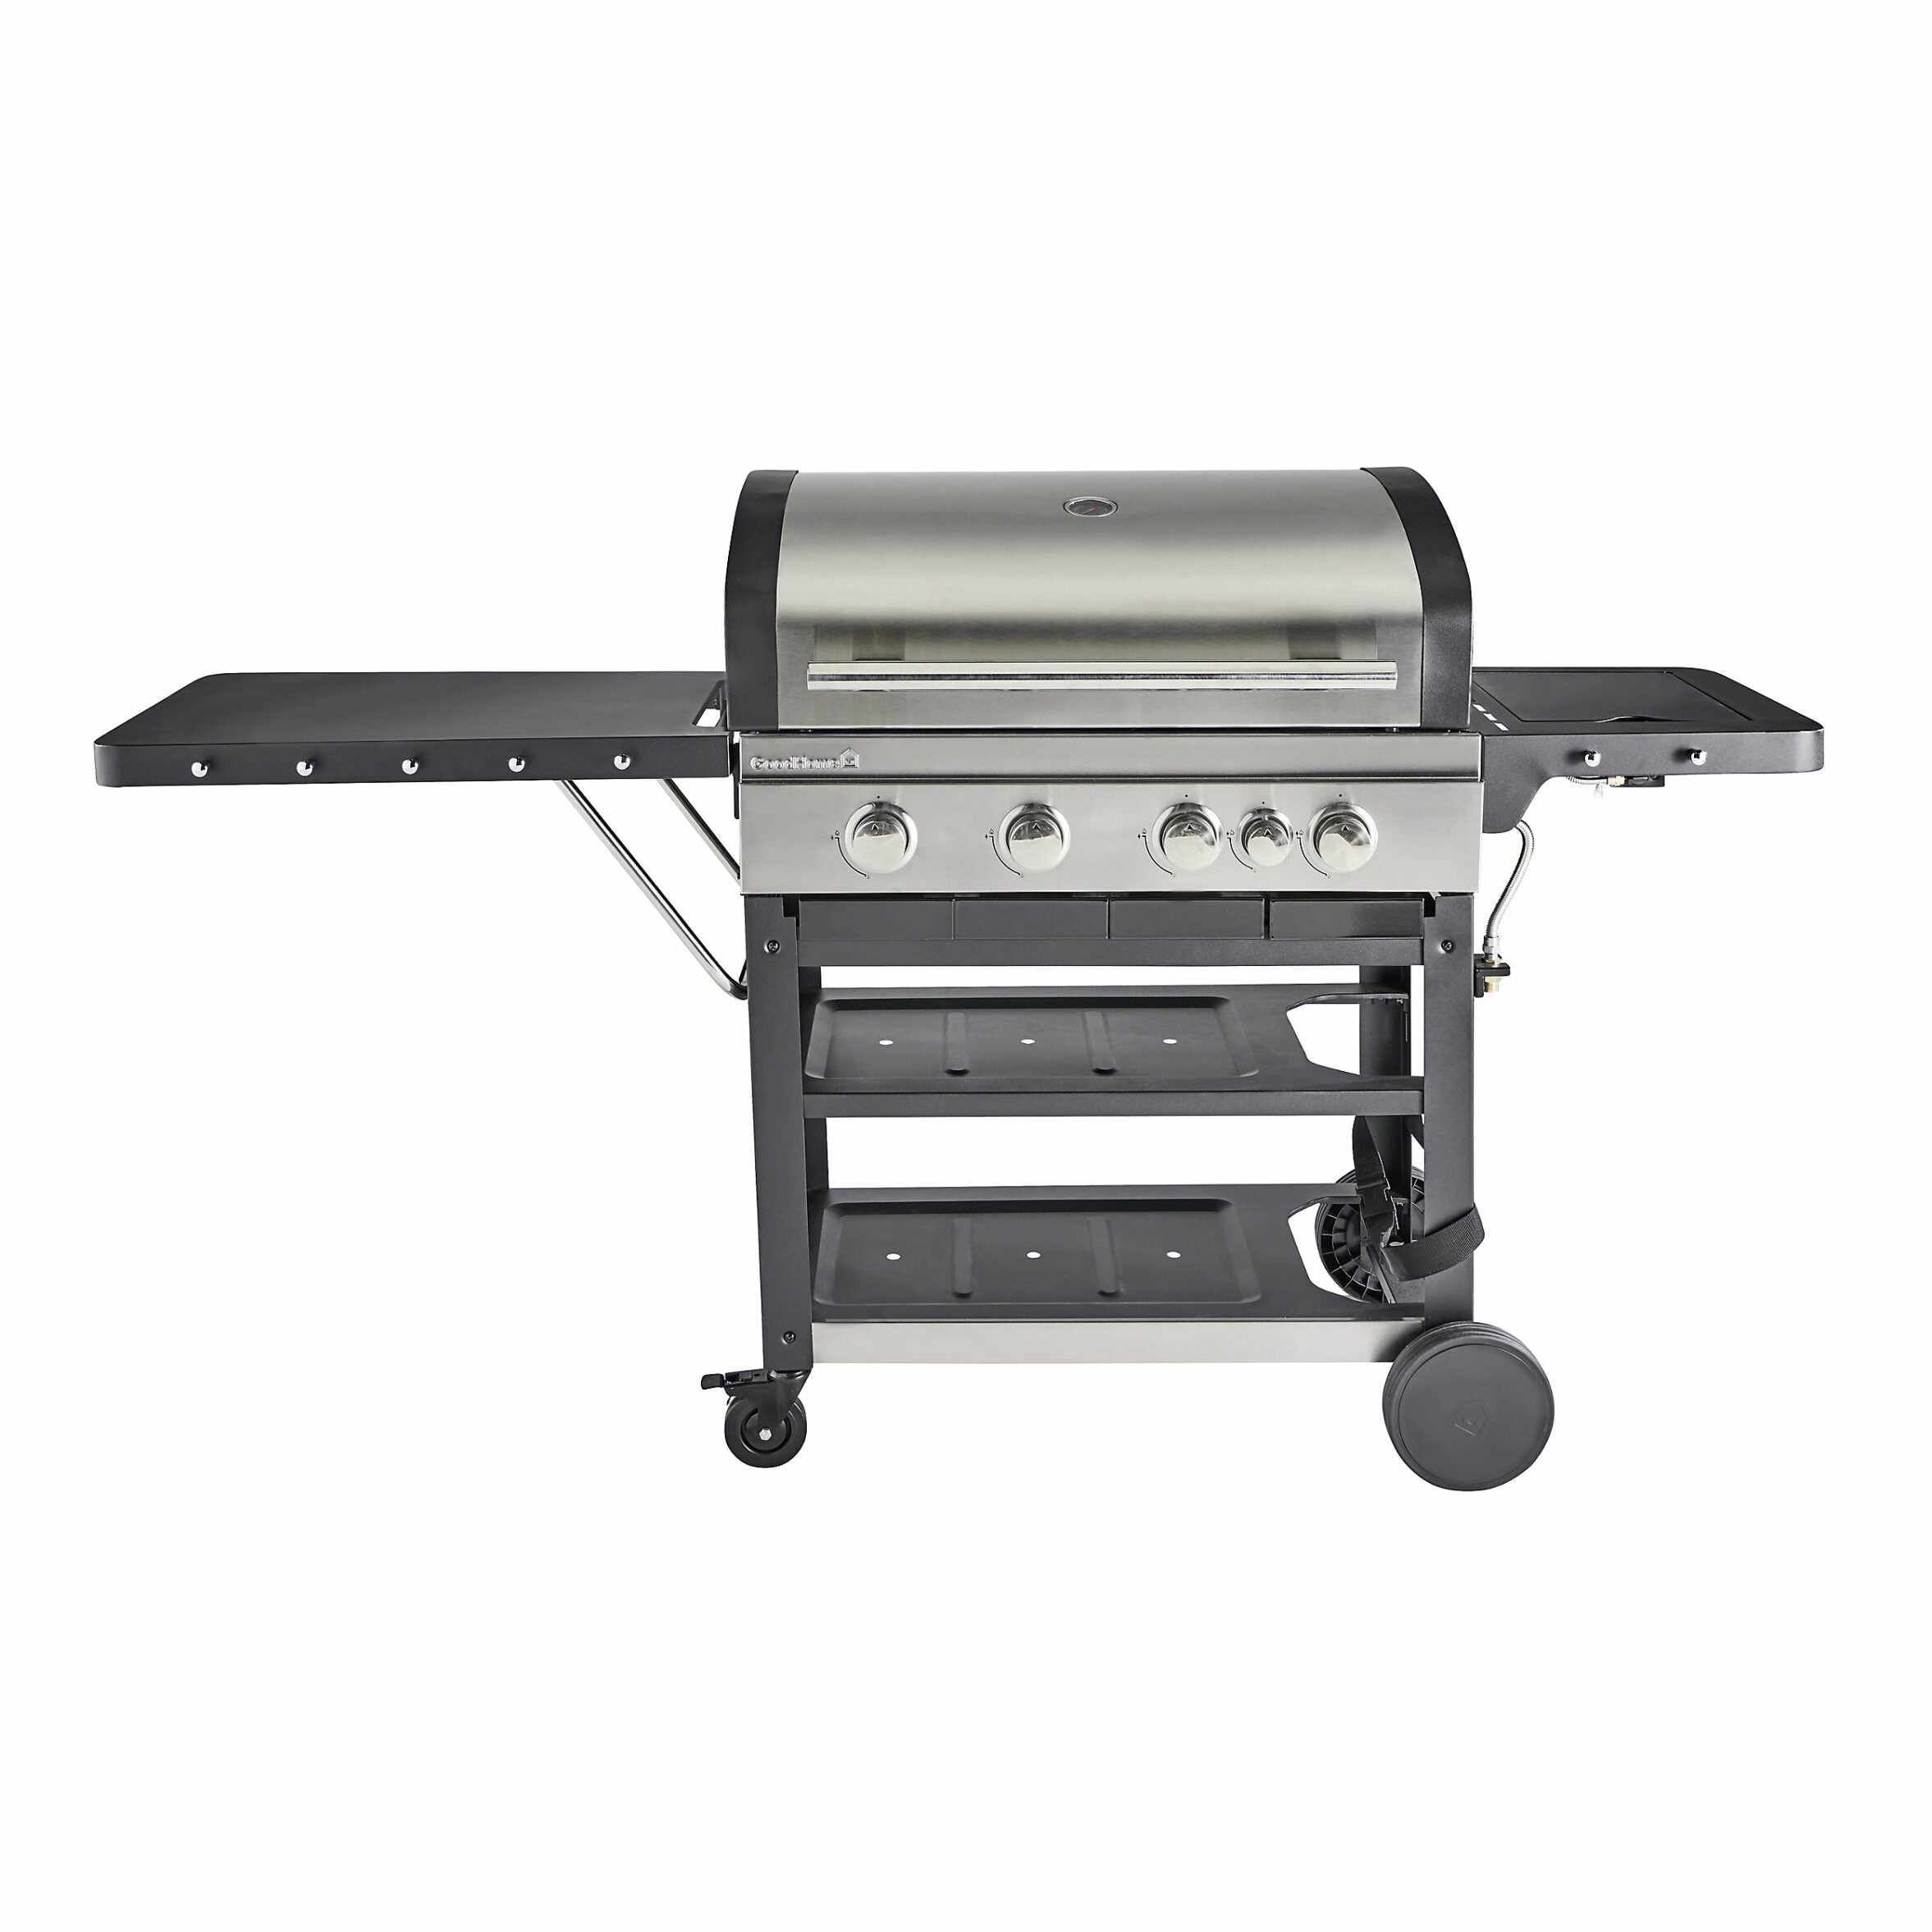 GoodHome Owsley 4.1 Black 4 burner Gas Barbecue +1 Side Burner Outdoor Grill 7896